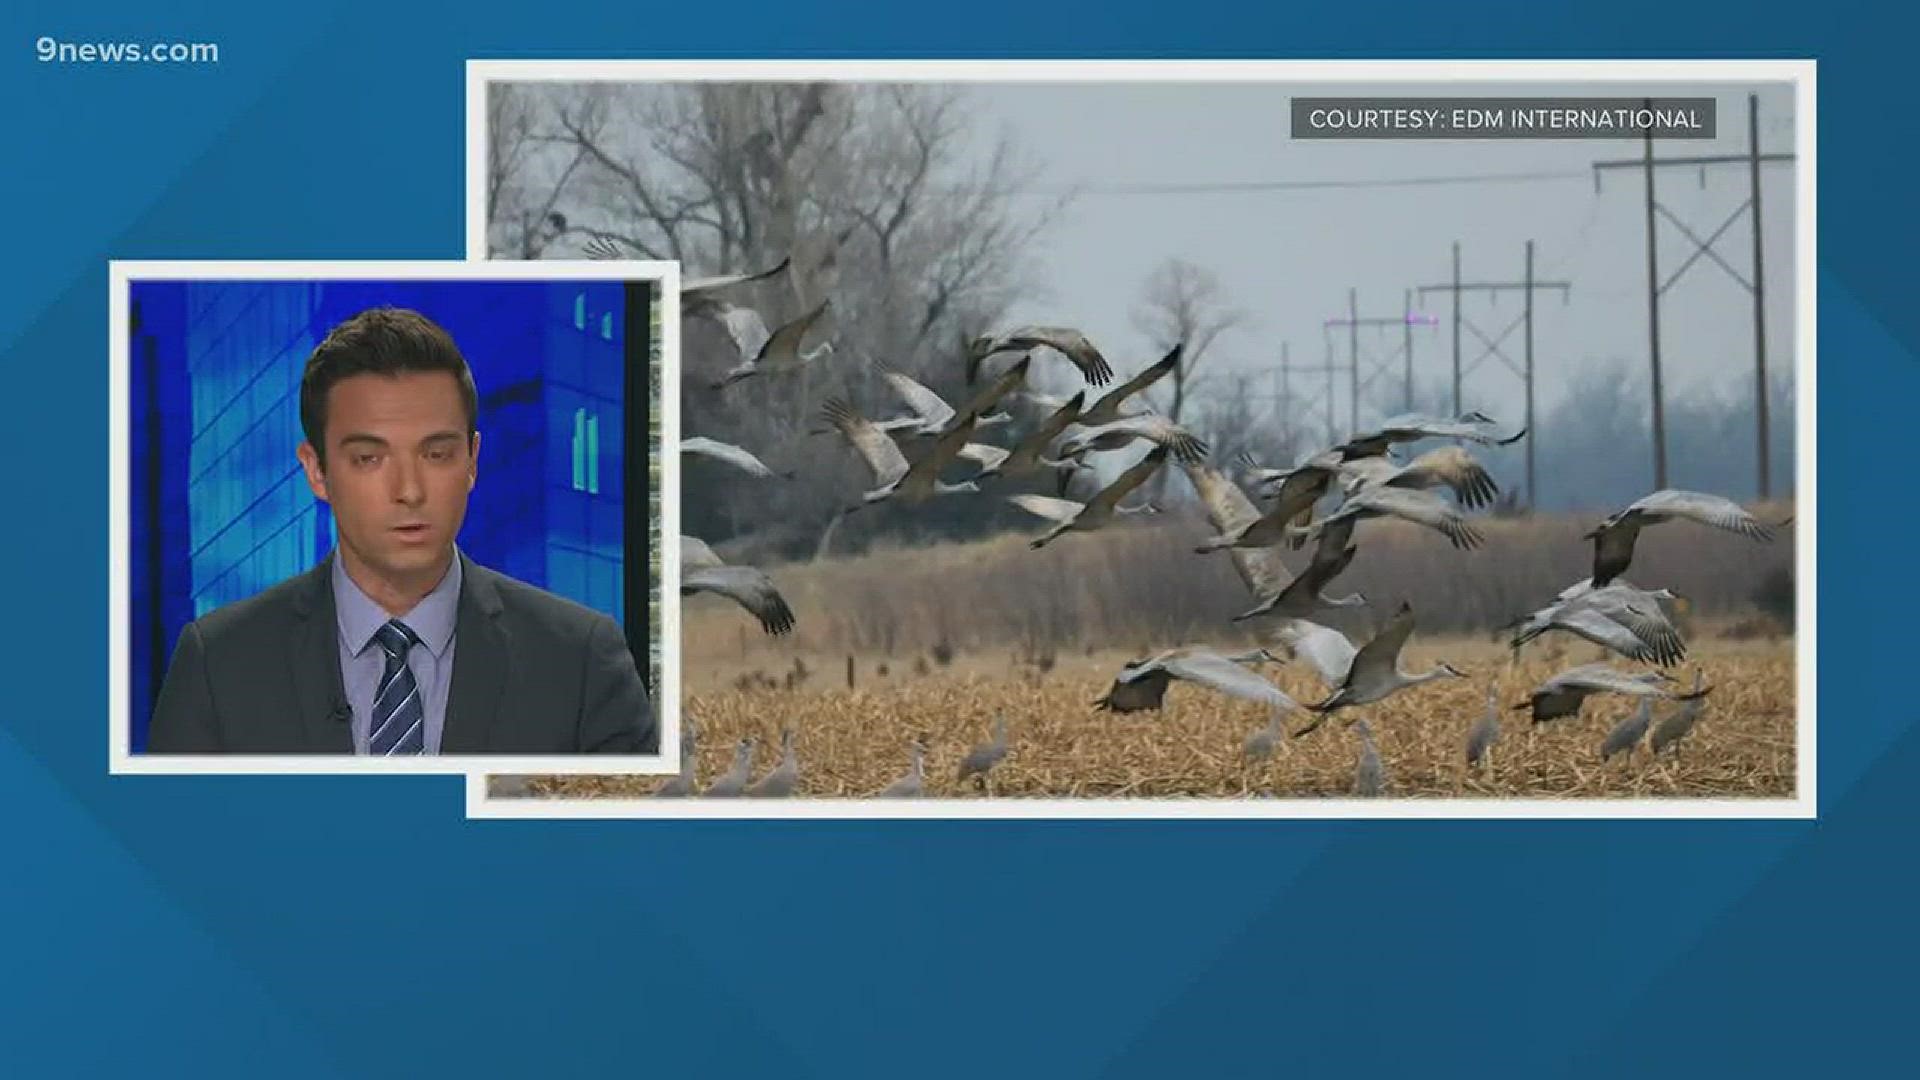 A Fort Collins company is working to save cranes across the country by putting UV lights on power lines.